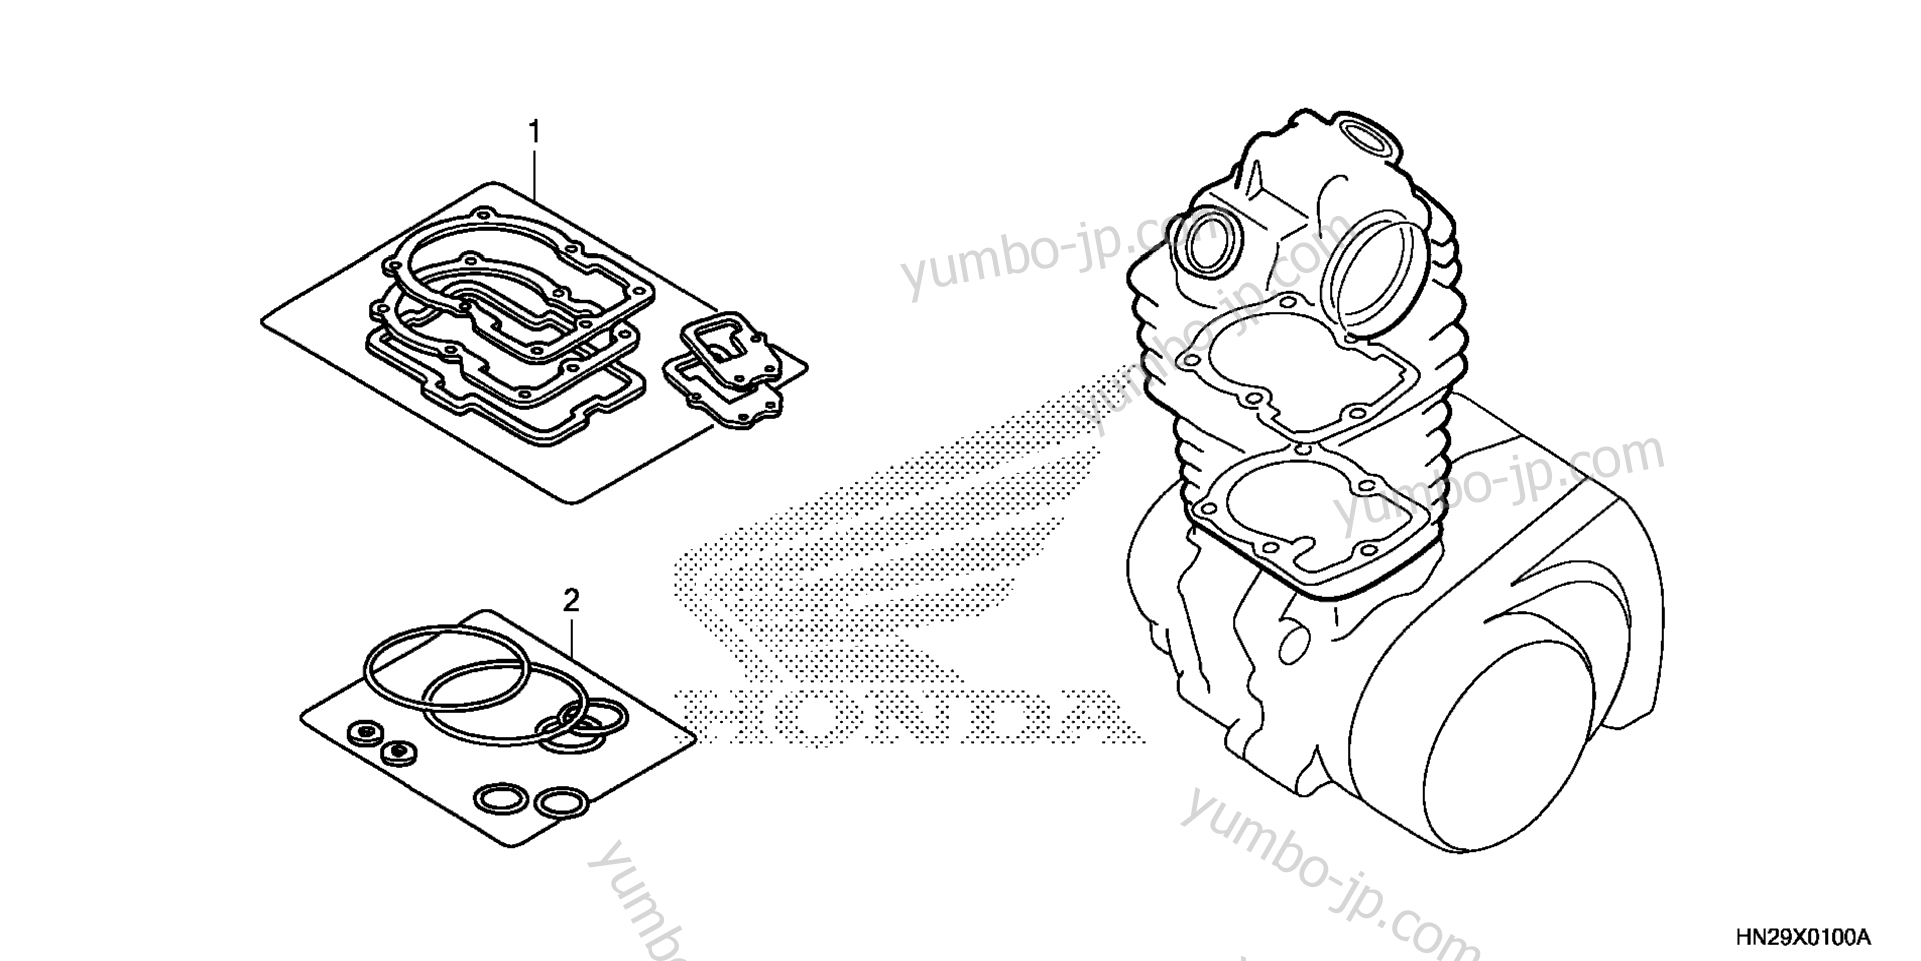 GASKET KIT A for ATVs HONDA TRX500FPA AC 2013 year